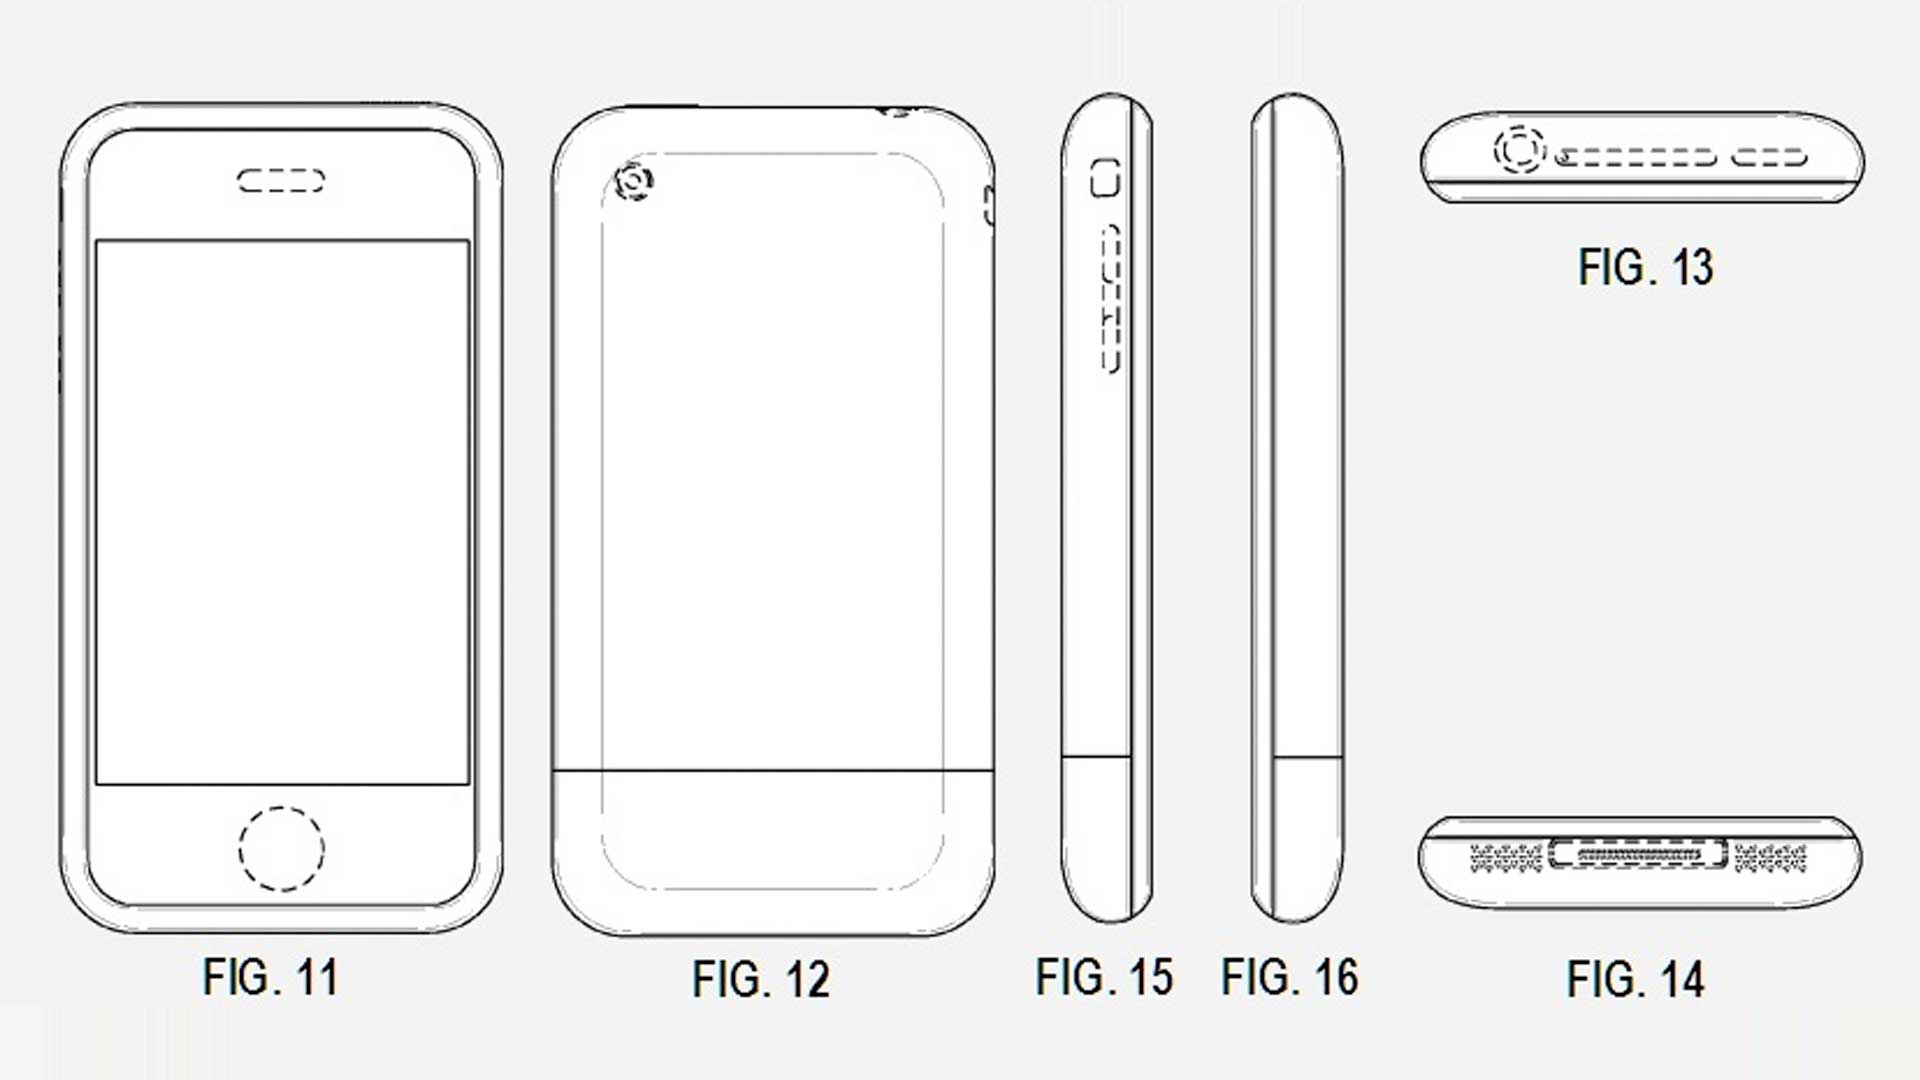 Pictures in Patent Application Give Clues To The First iPhone's Features